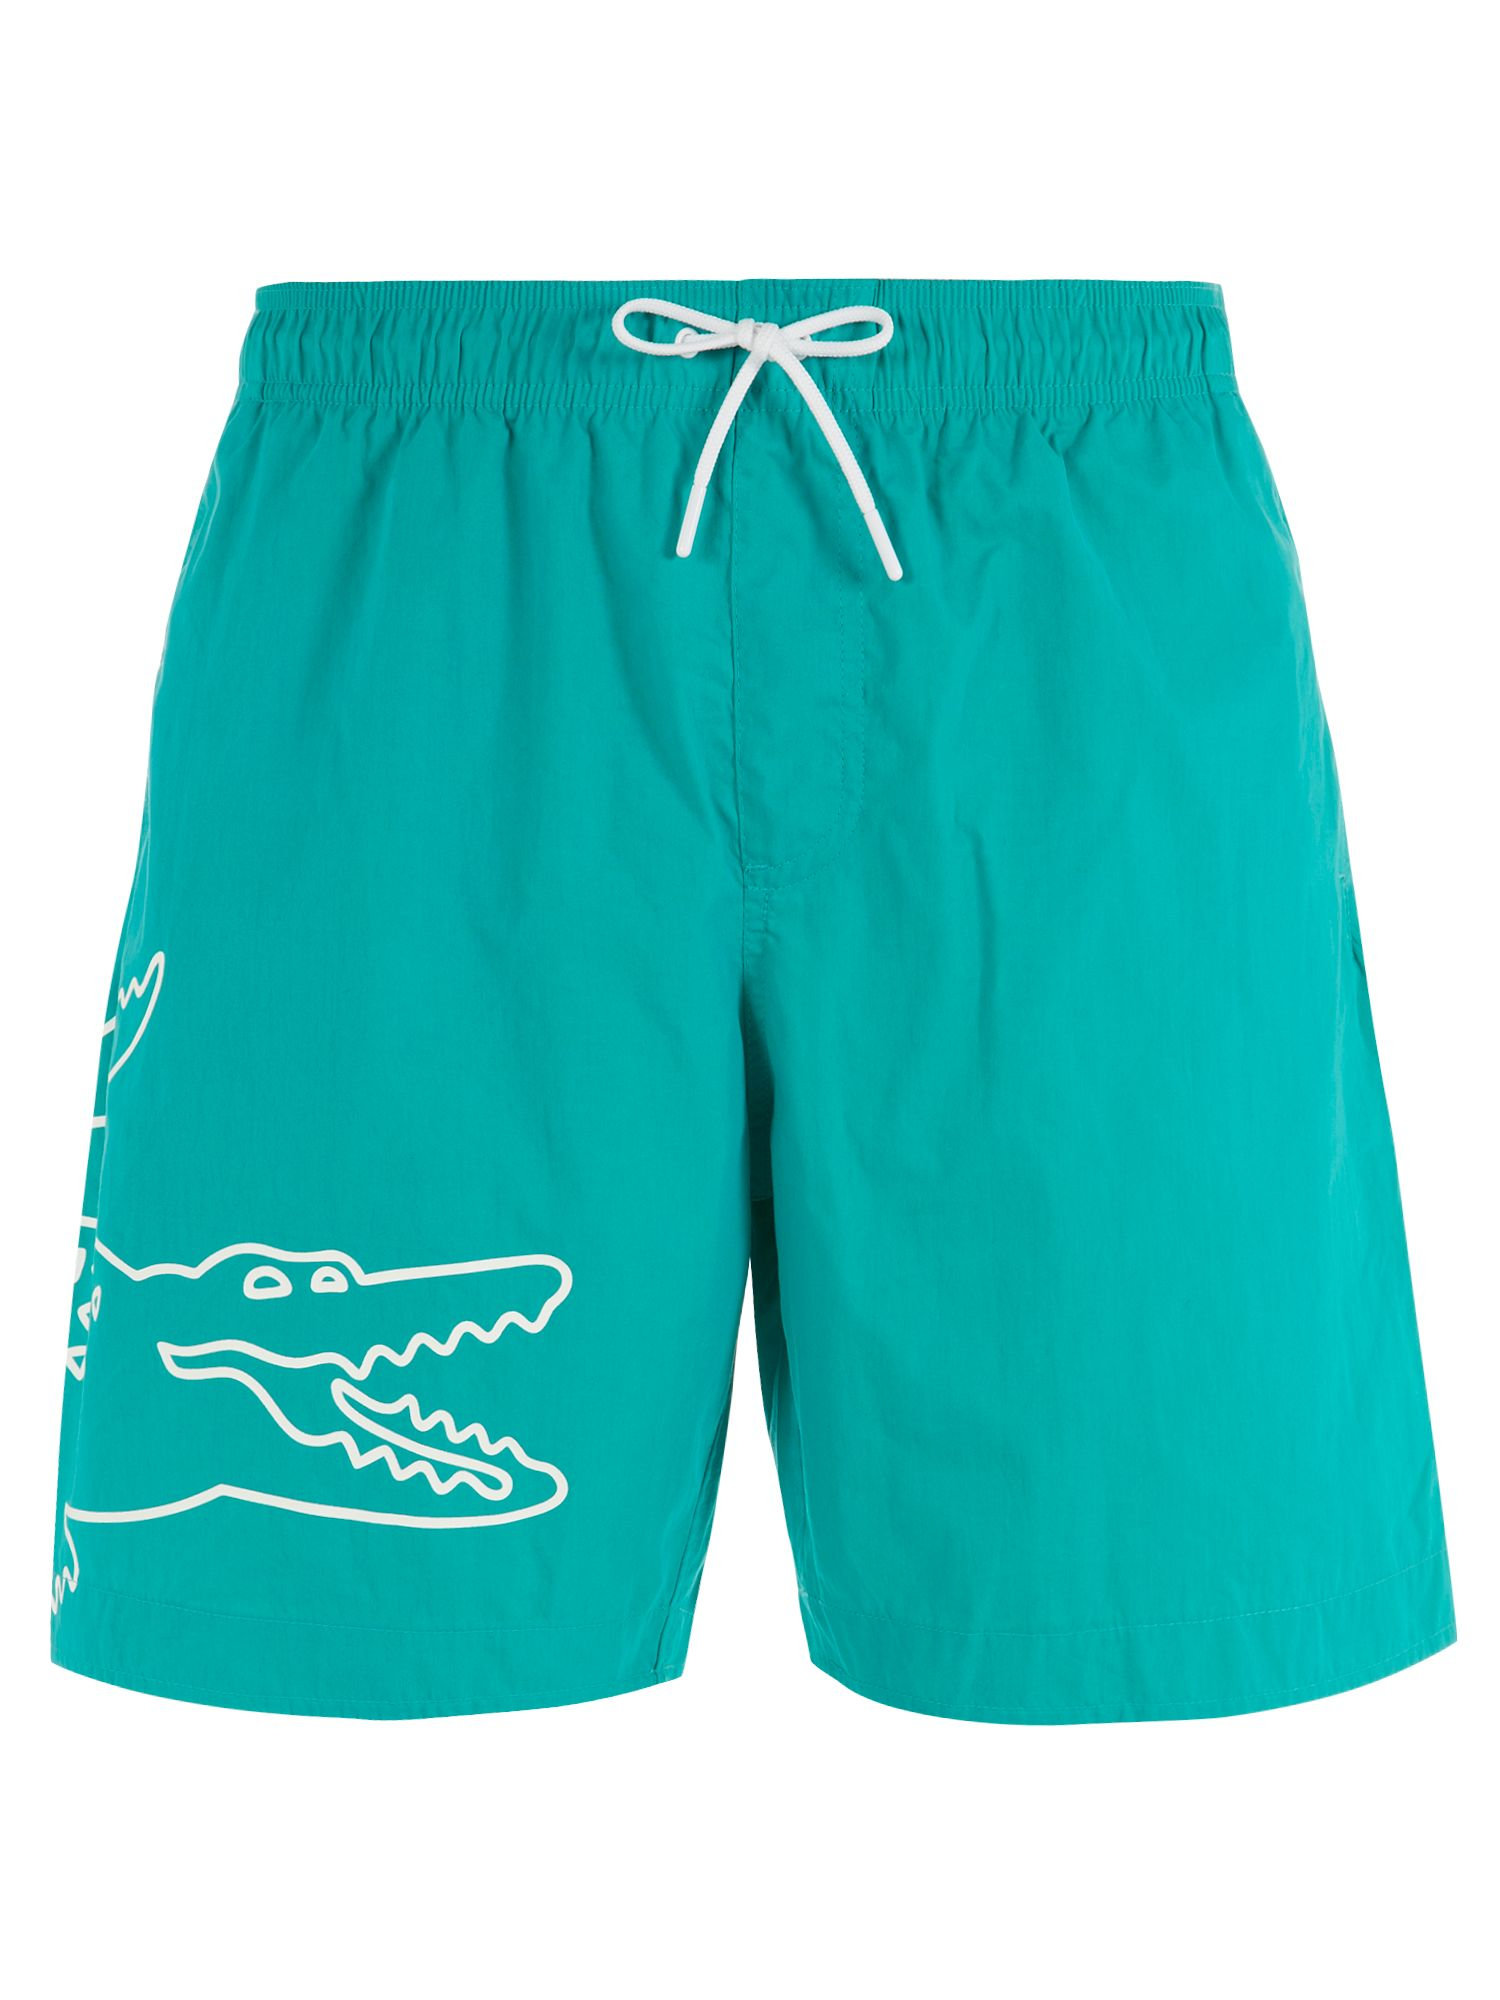 Lacoste Printed Swim Shorts in Green for Men (Teal) | Lyst